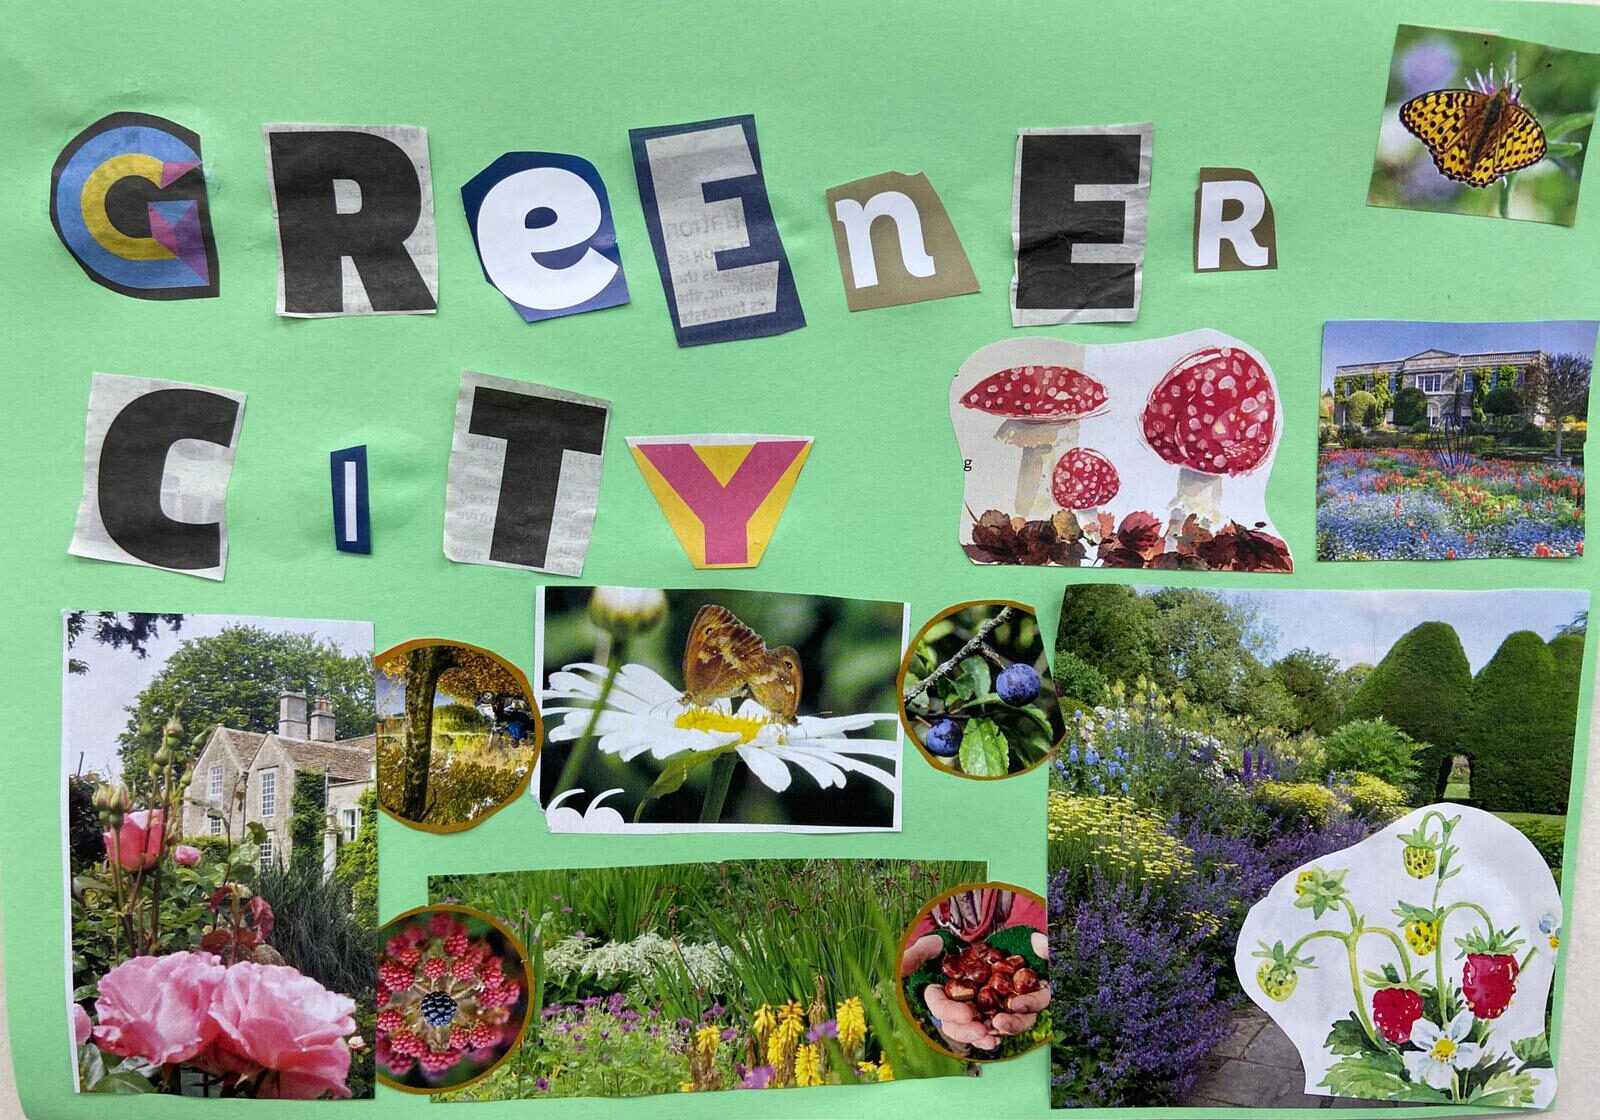 Collage of flowers, wildlife, with the words 'Greener City' featured in a bold, overlapping type.